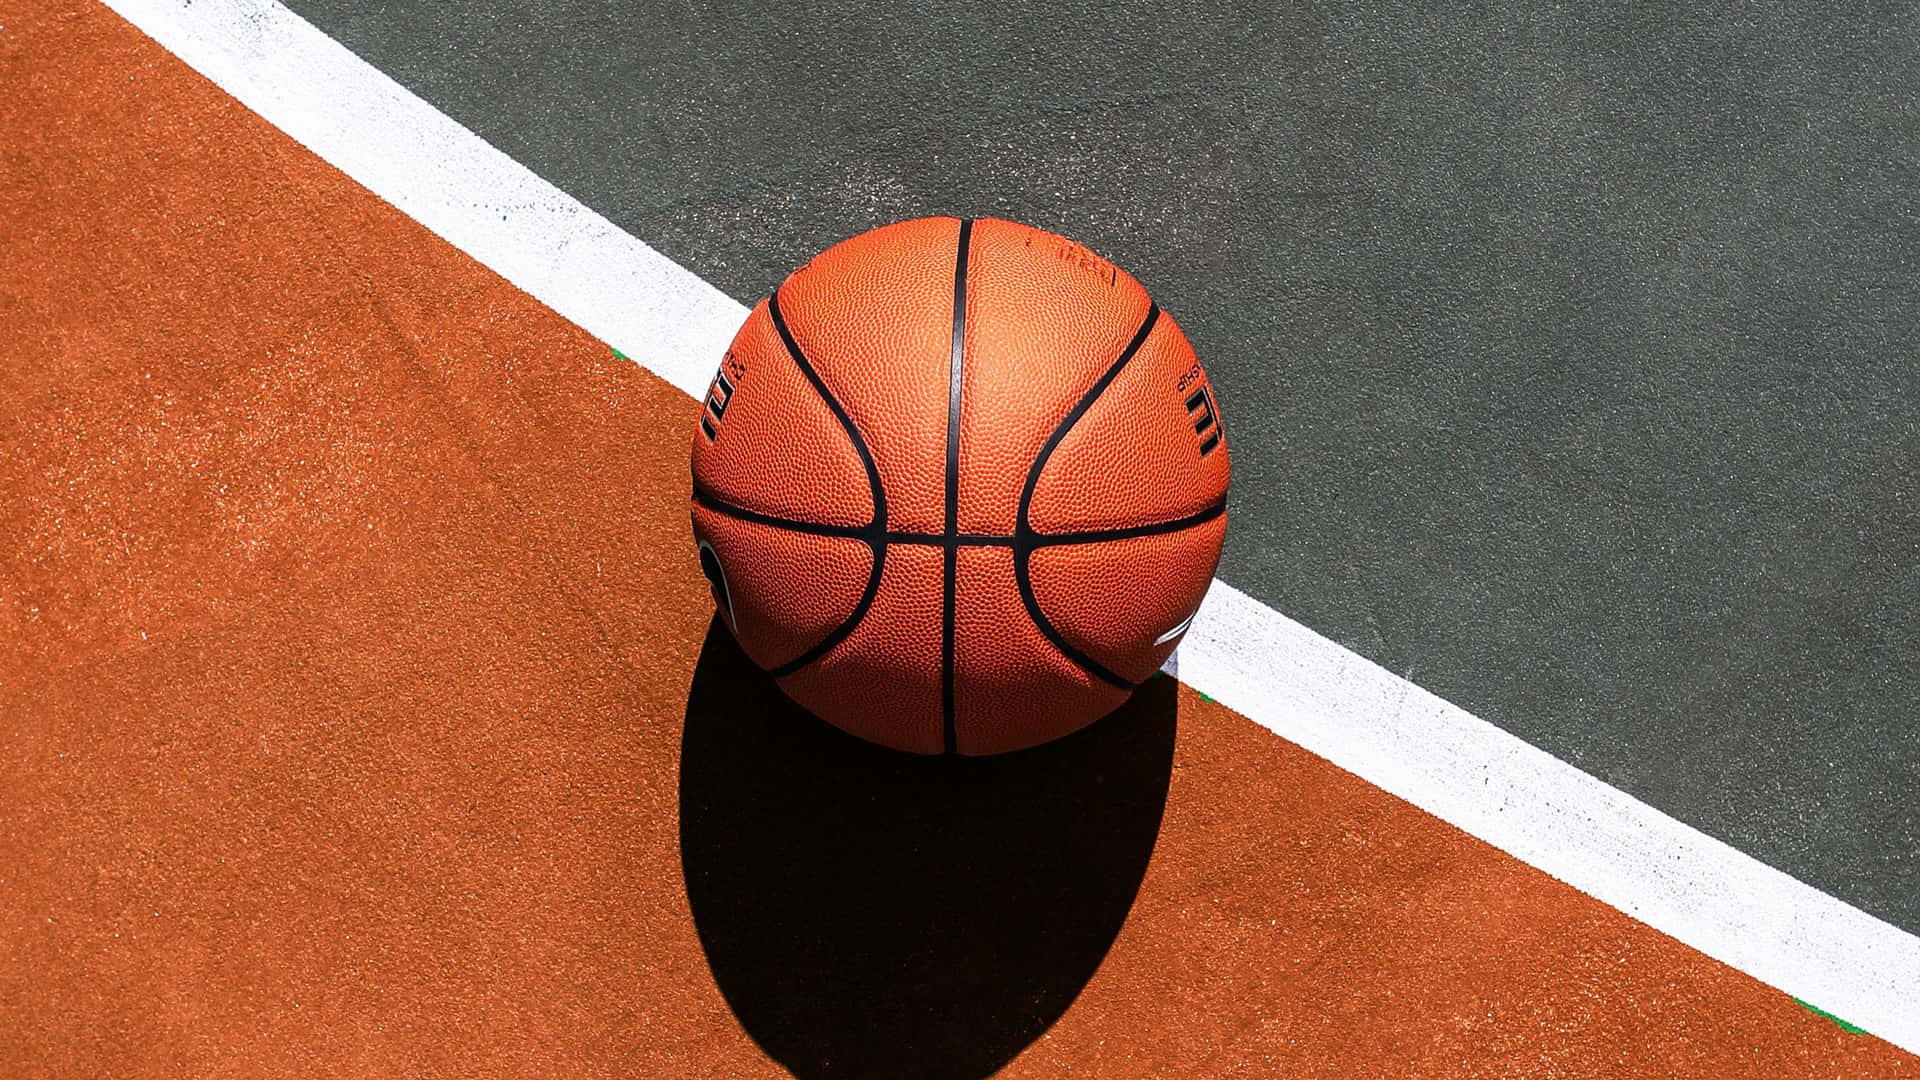 Get Ready to Dunk and Shoot with this Ball! Wallpaper